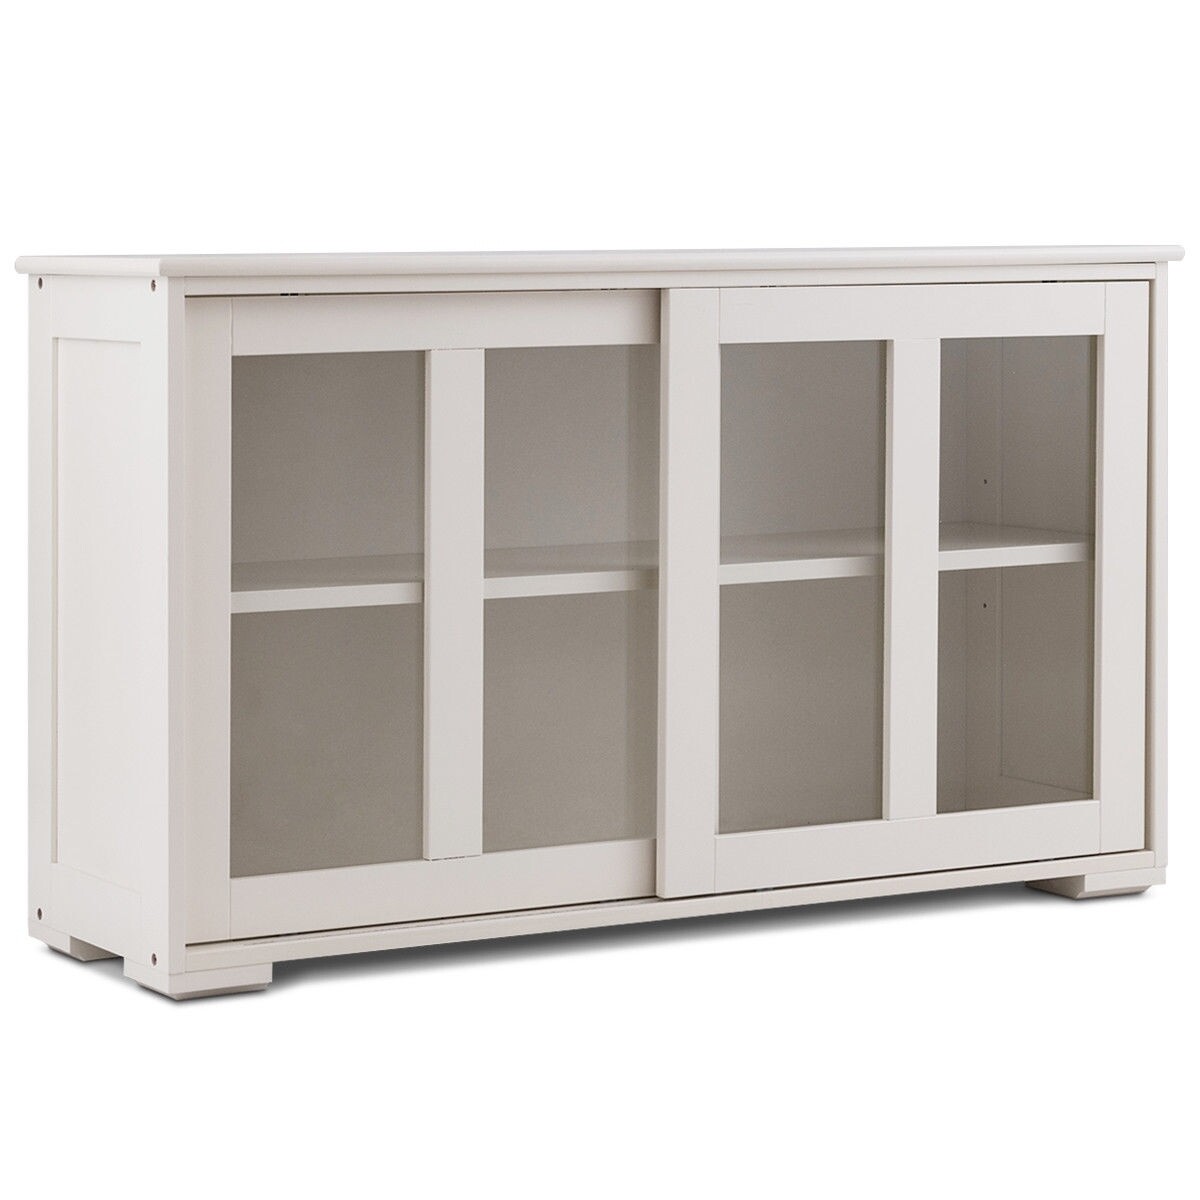 Sideboard Buffet Cupboard Storage Cabinet with Sliding Door-Cream White - Color: White